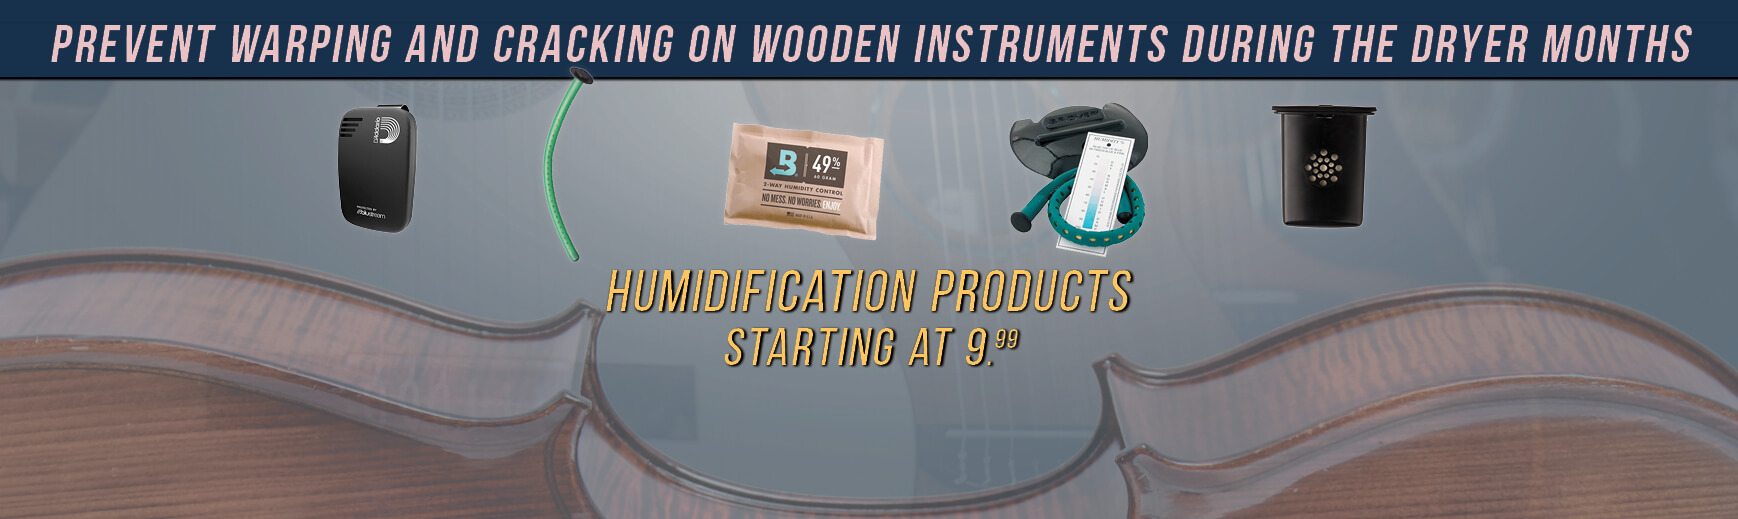 Prevent warping and cracking on wooden instruments during the dryer months.  Humidification products starting at $9.99